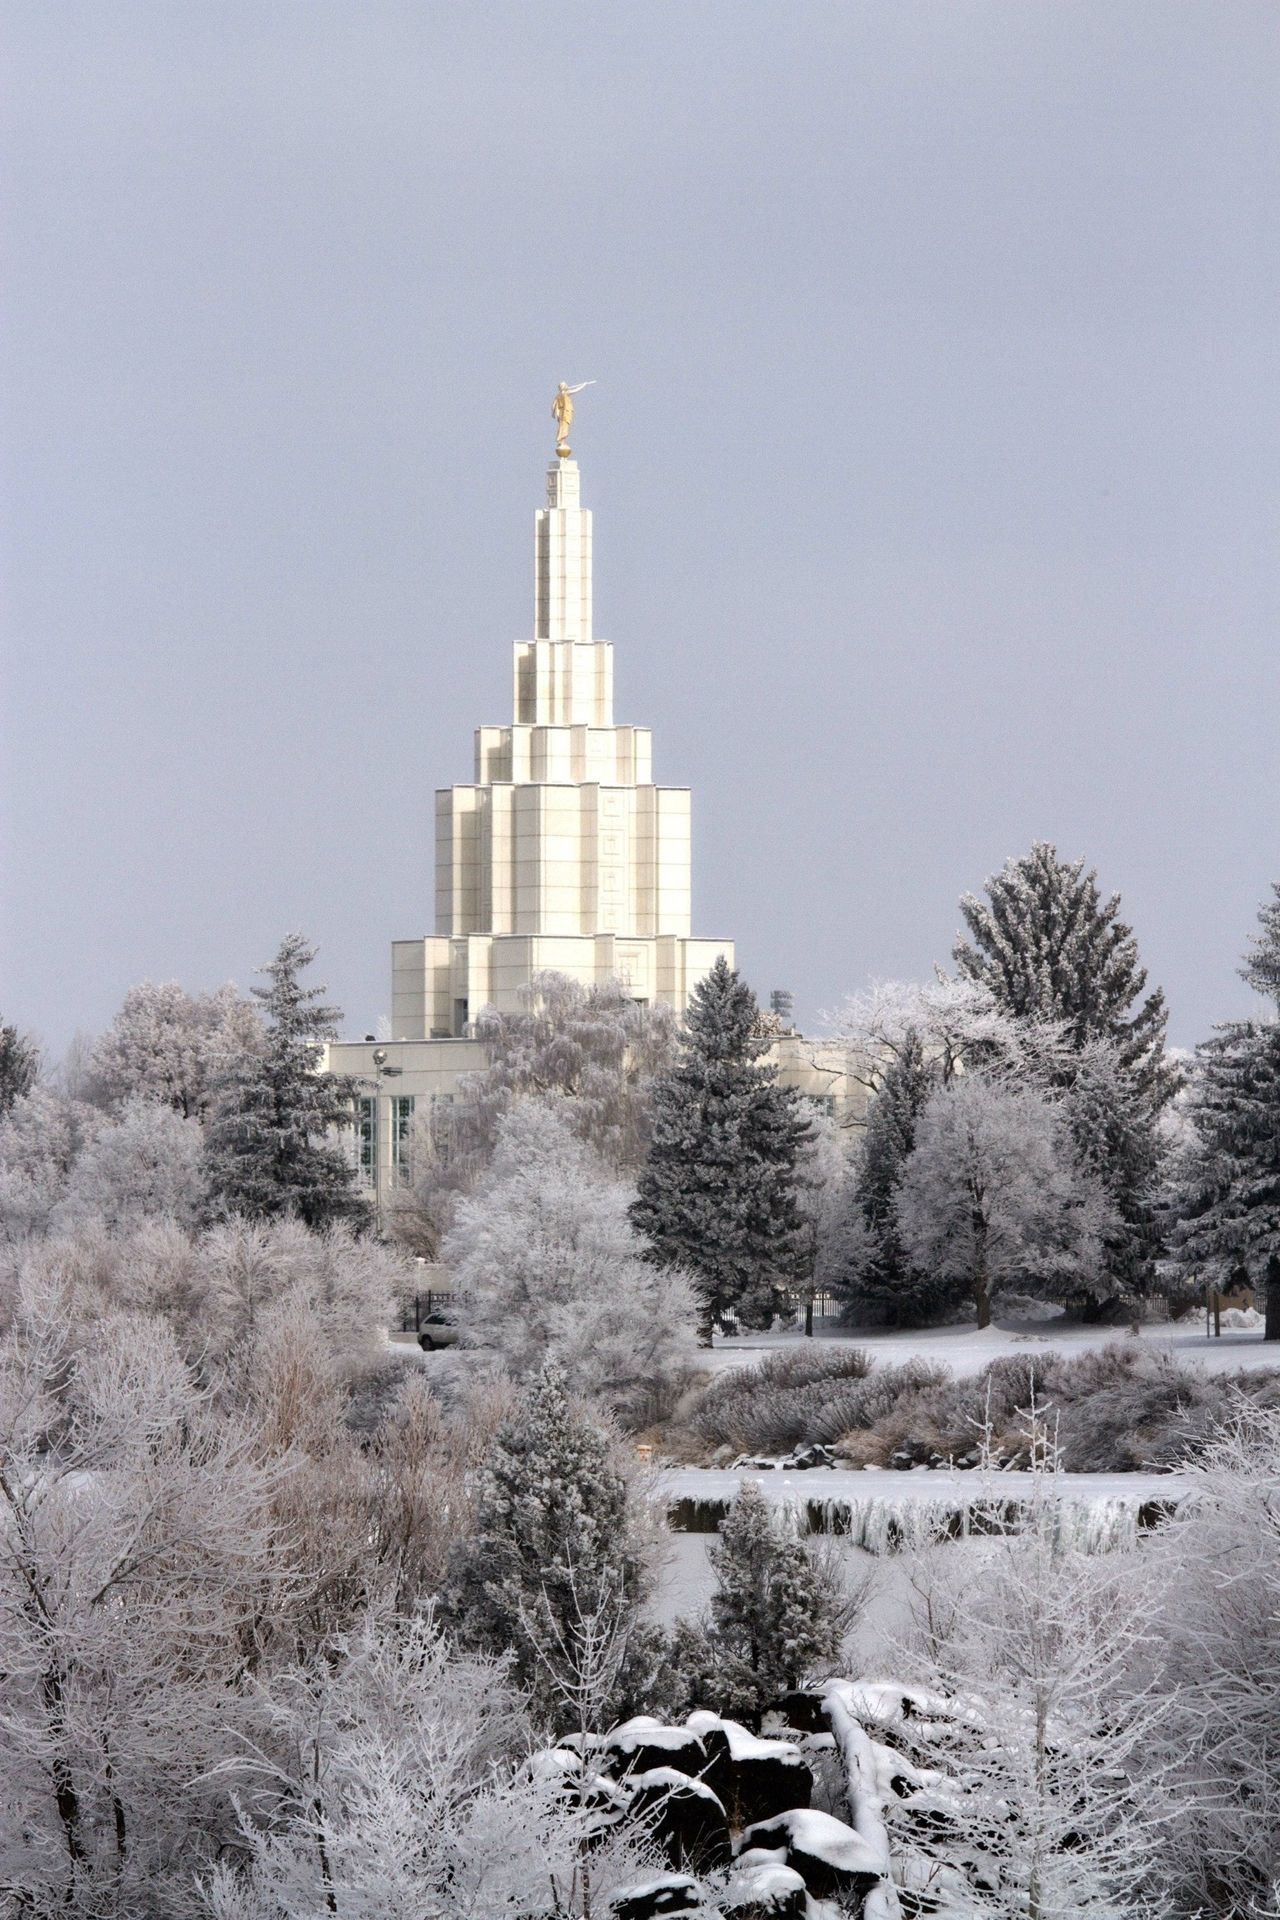 The spire of the Idaho Falls Idaho Temple in the winter.